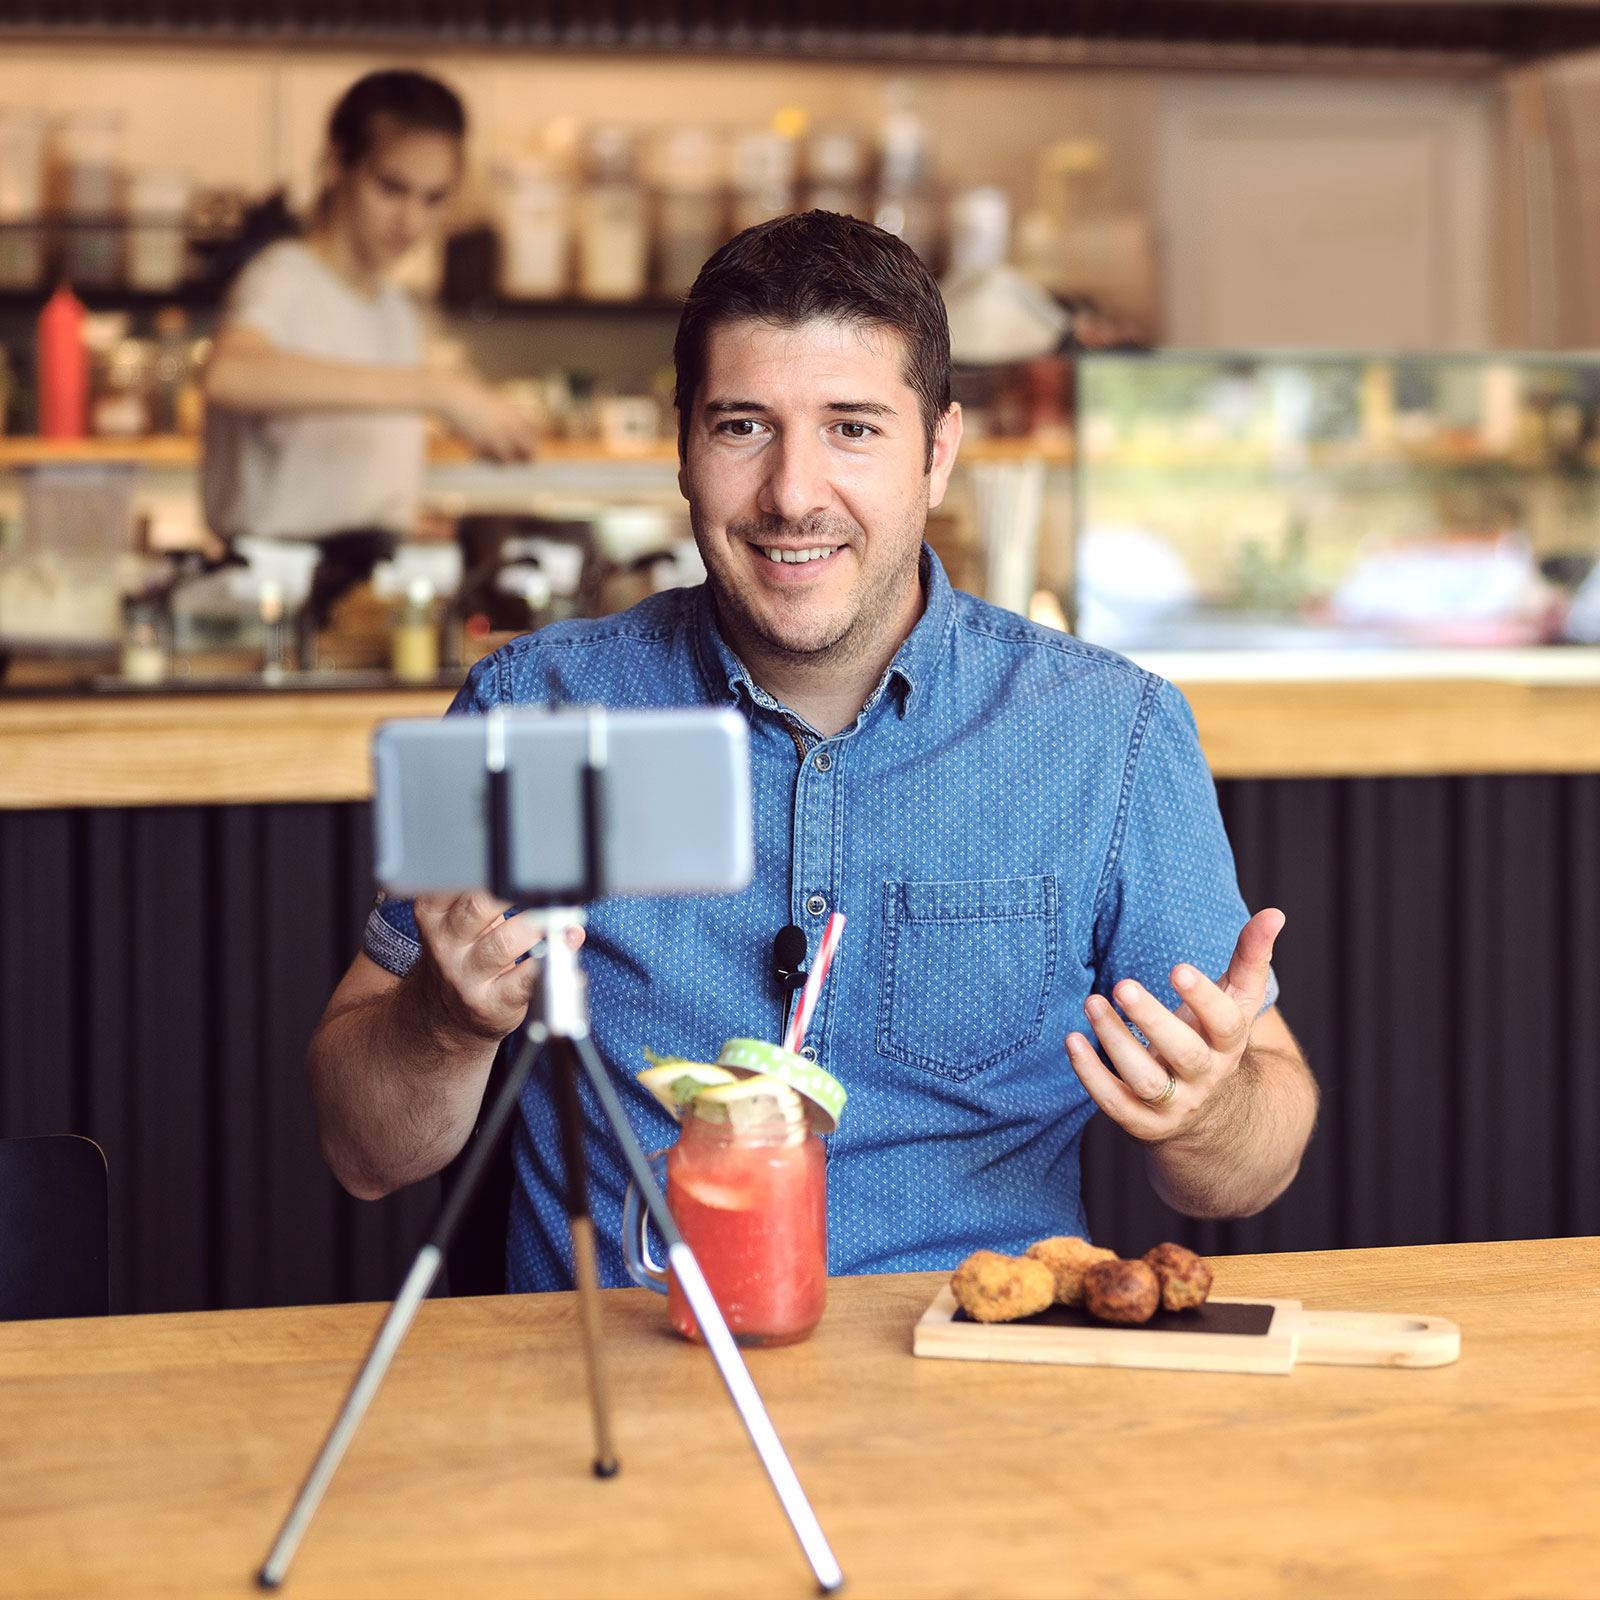 10 Creative Ways To Use Video In Your Restaurant’s Marketing Strategy